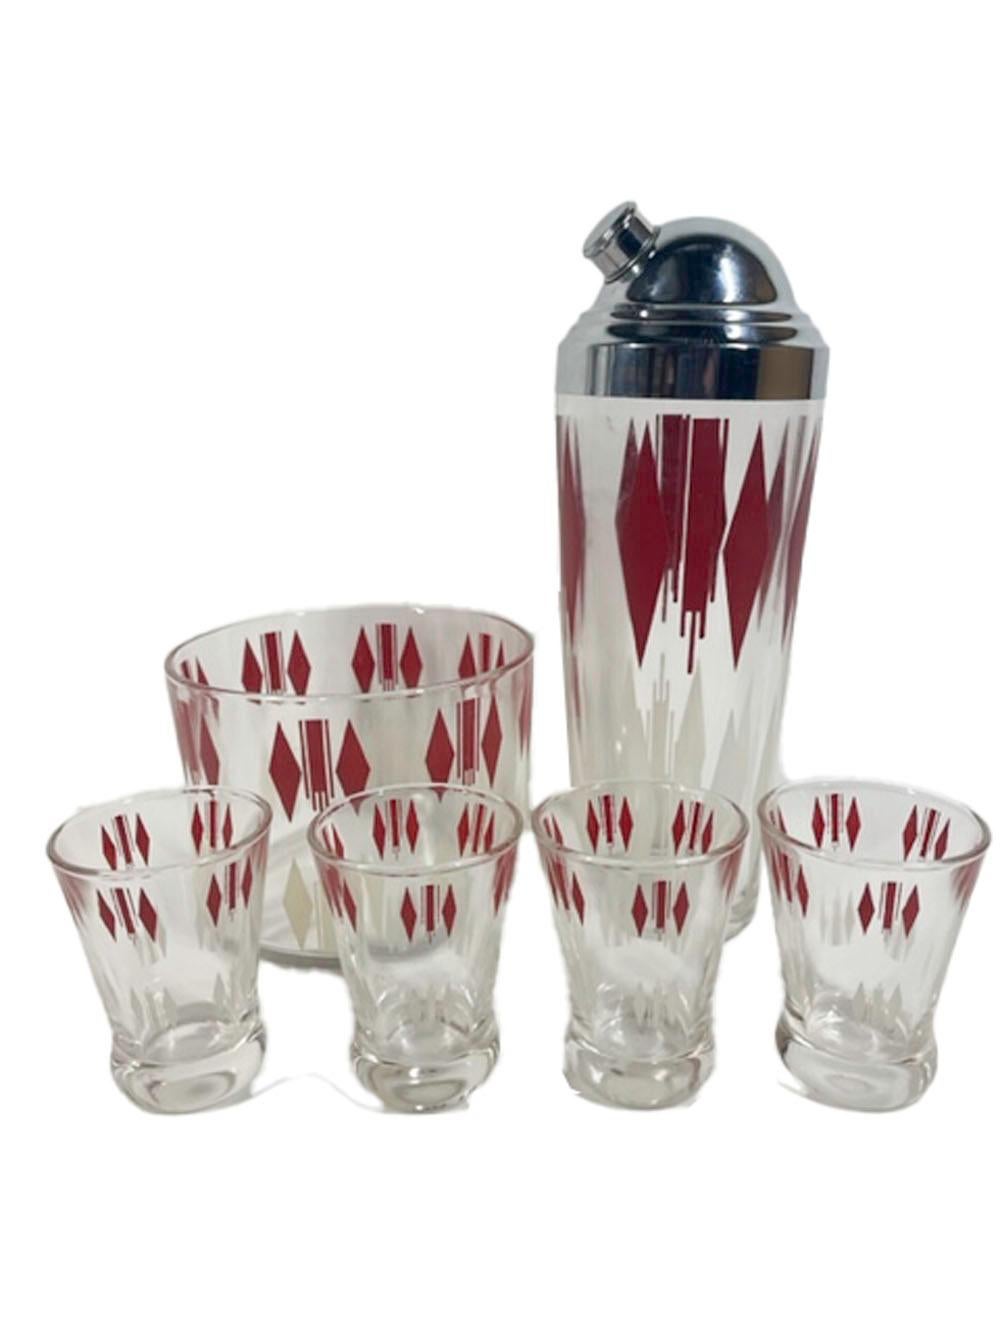 Six-piece Art Deco cocktail set consisting of a cocktail shaker with domed chrome lid, Ice bowl and 4 cocktail glasses. Each piece decorated with red enamel around the top and white enamel around the bottom. Decorated in an Art Deco pattern of